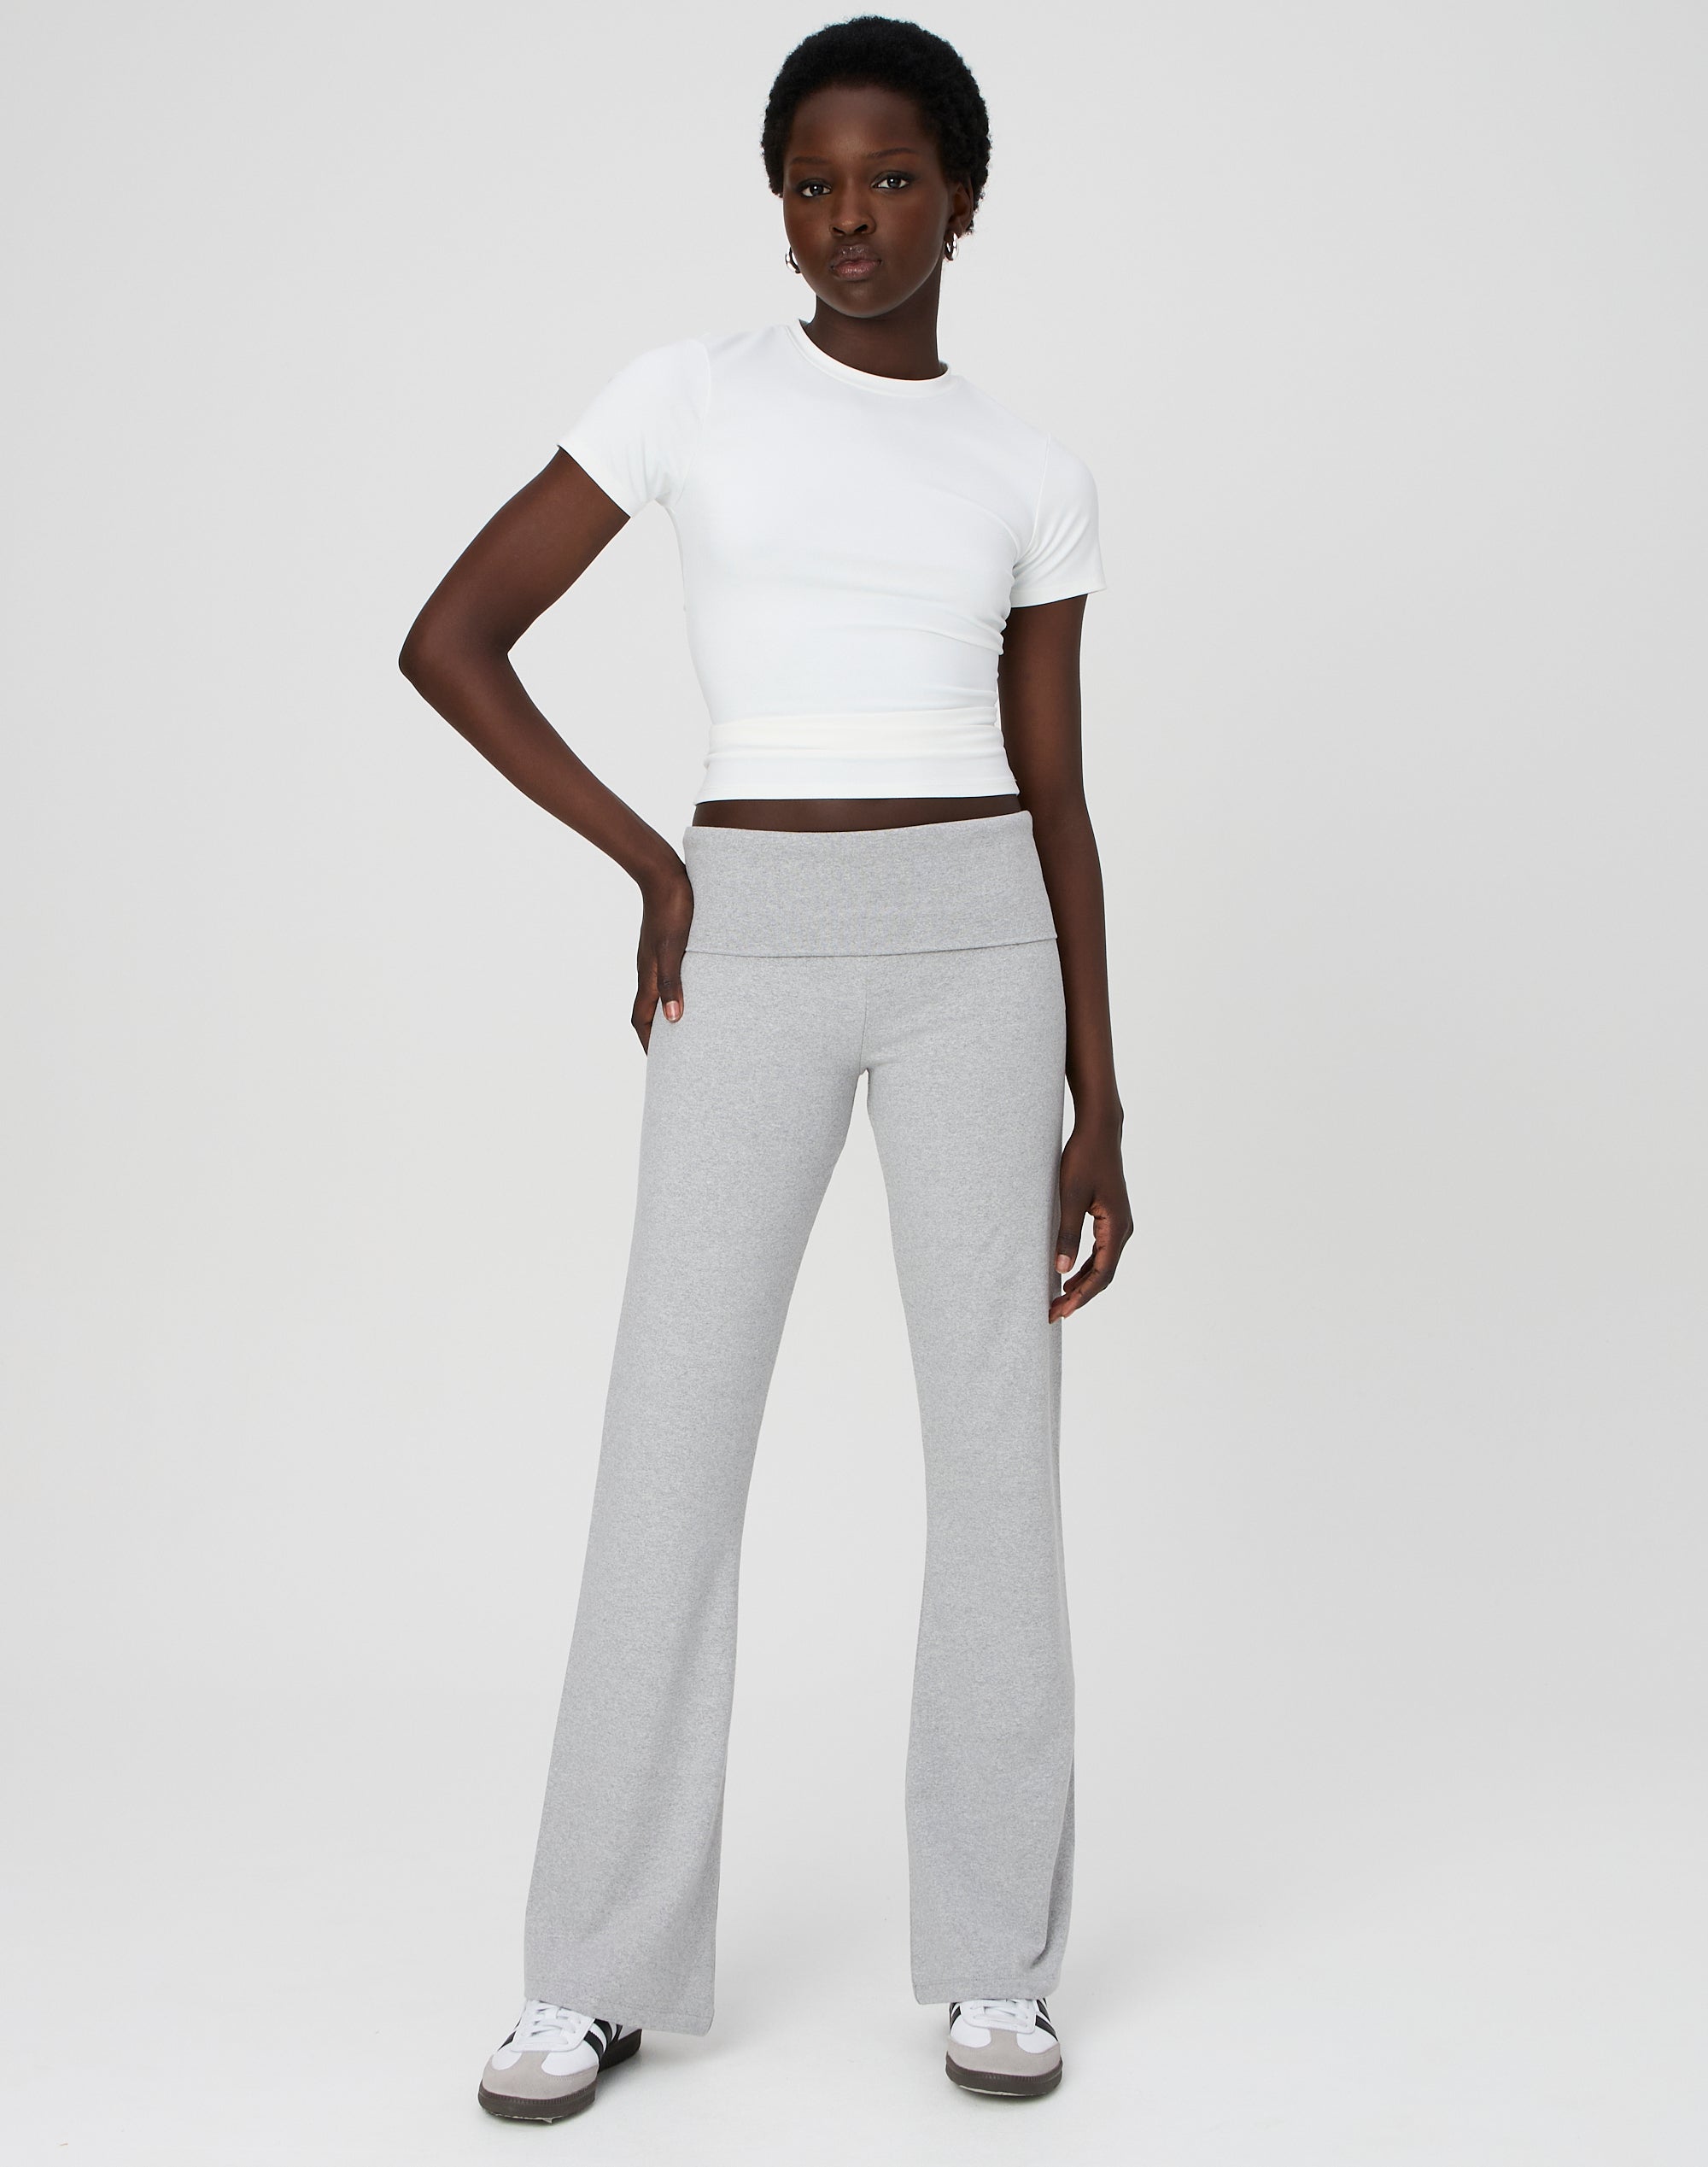 Cotton Foldover Flare Pant in Pale Grey Marle